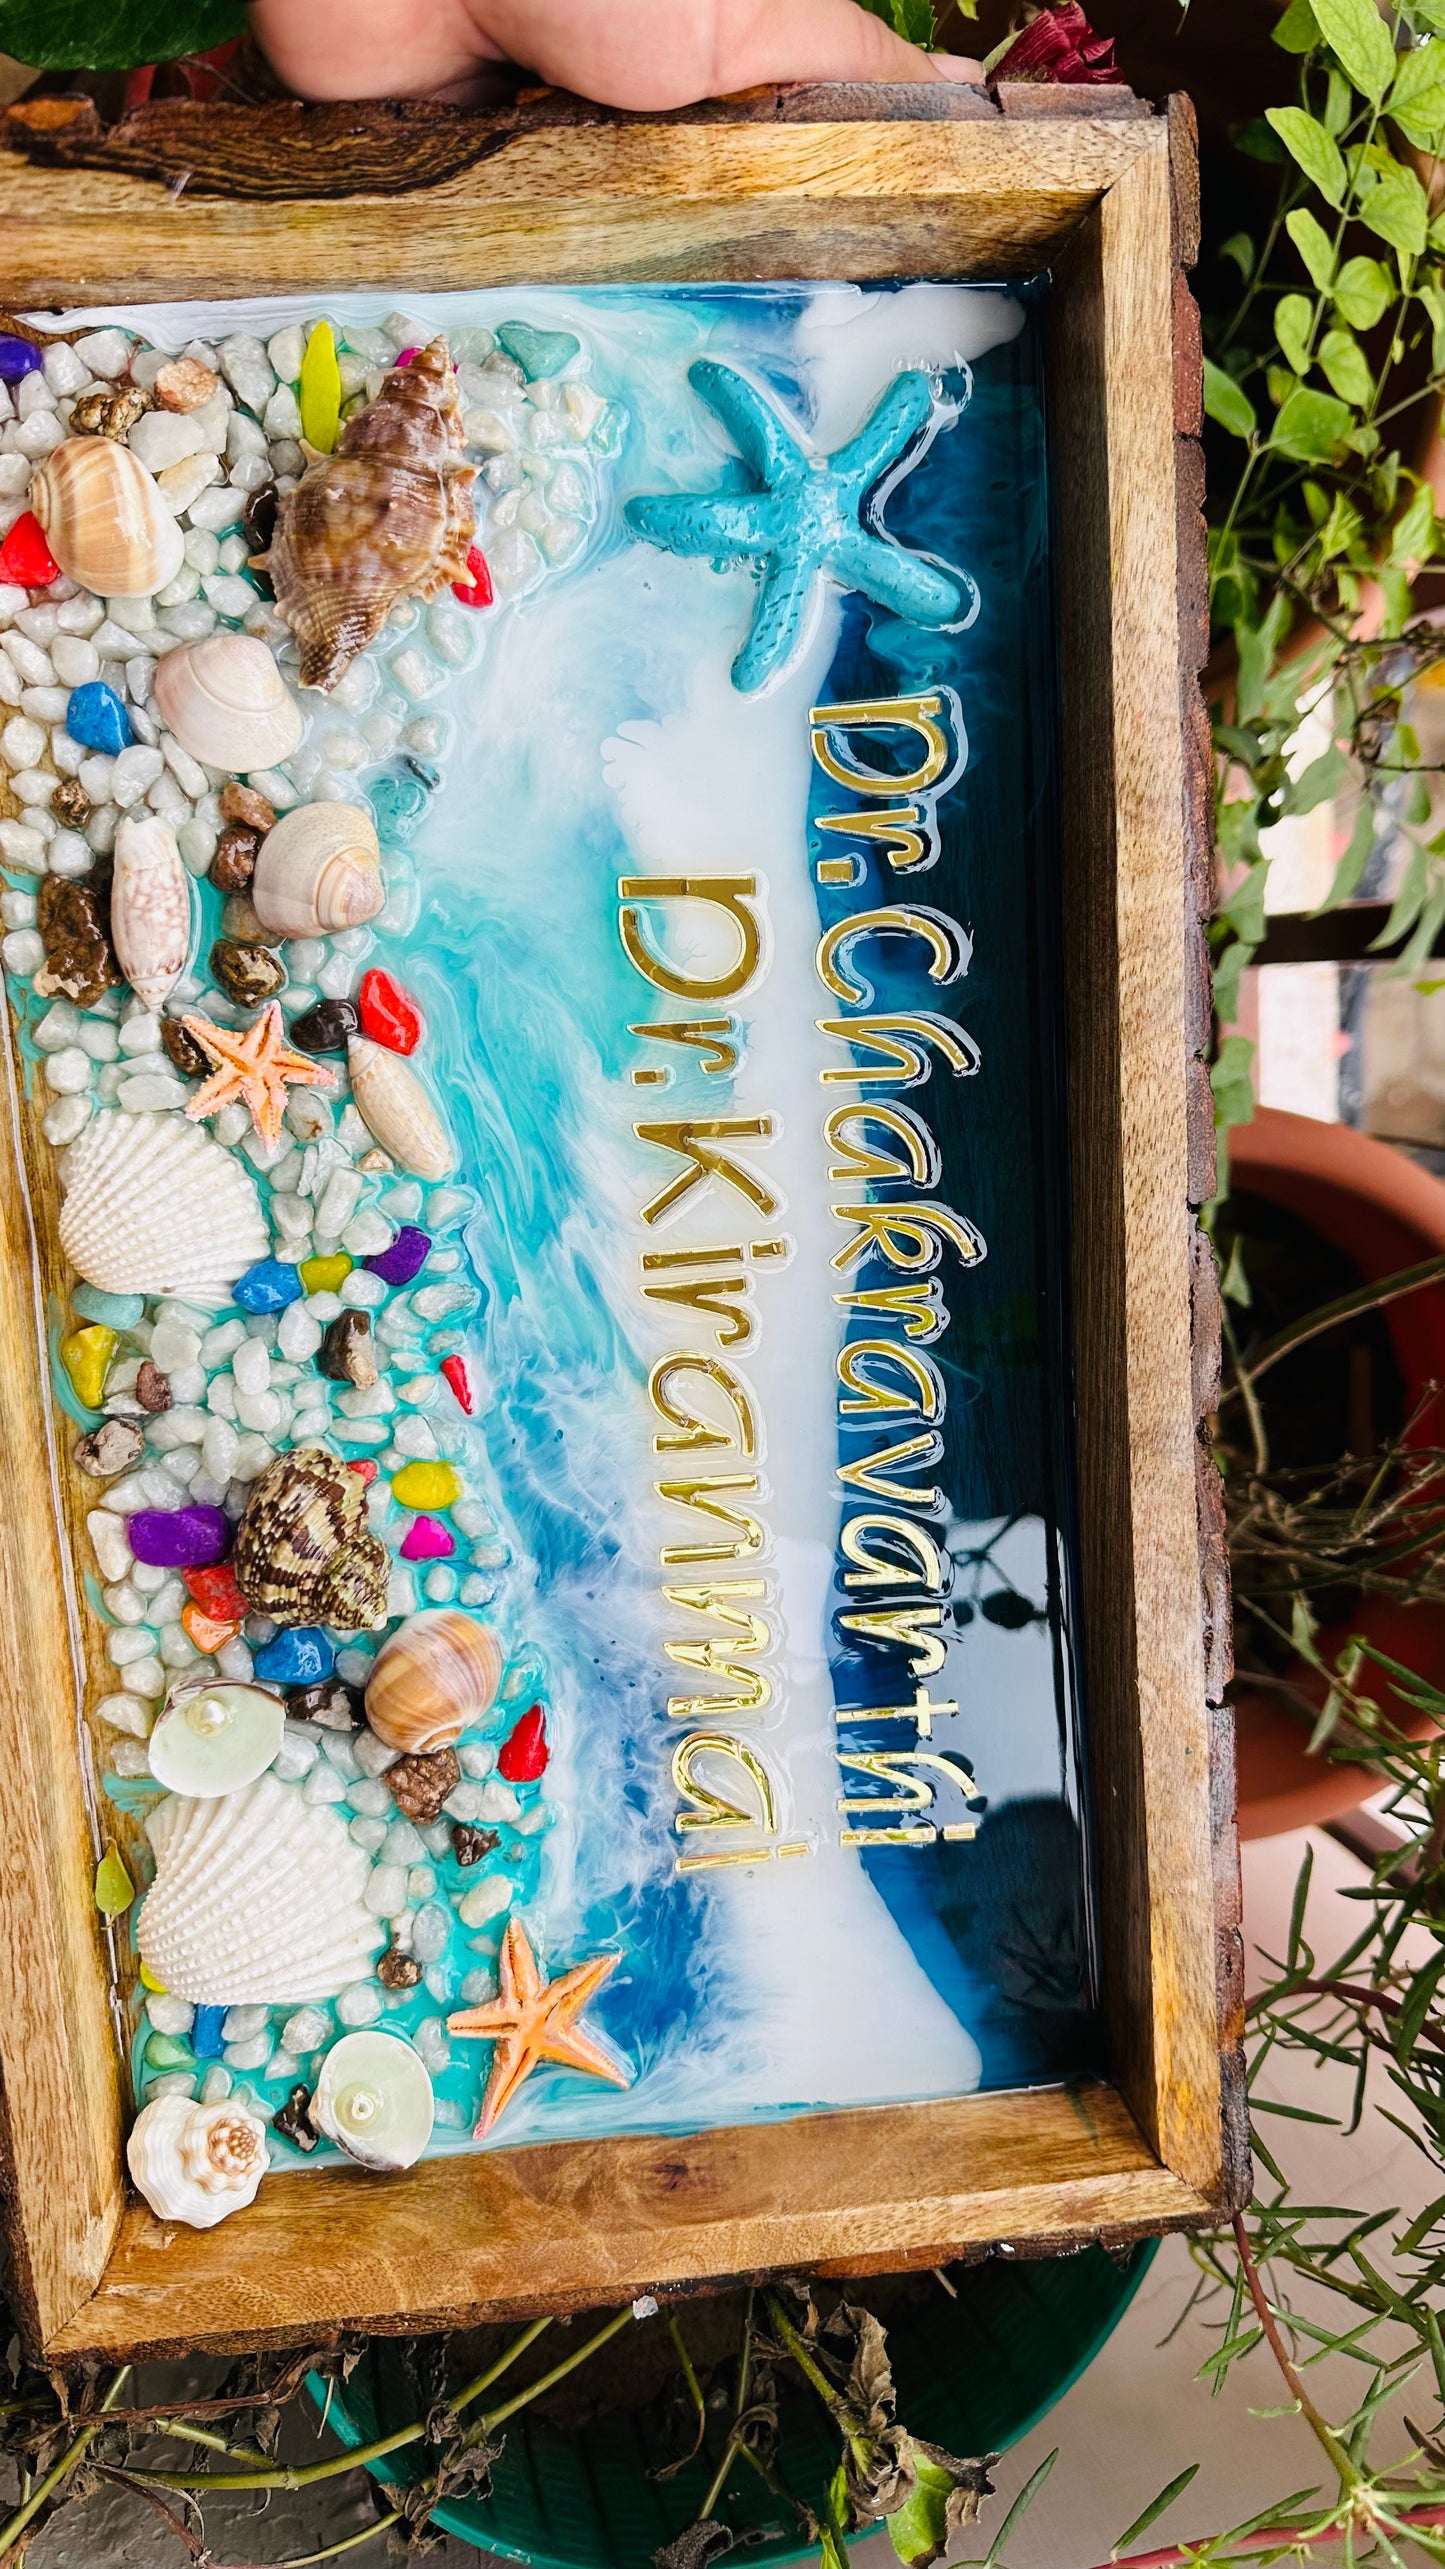 Rocky Beach Resin Name Plates | Ocean Themed House Name Plates on Wooden Tray